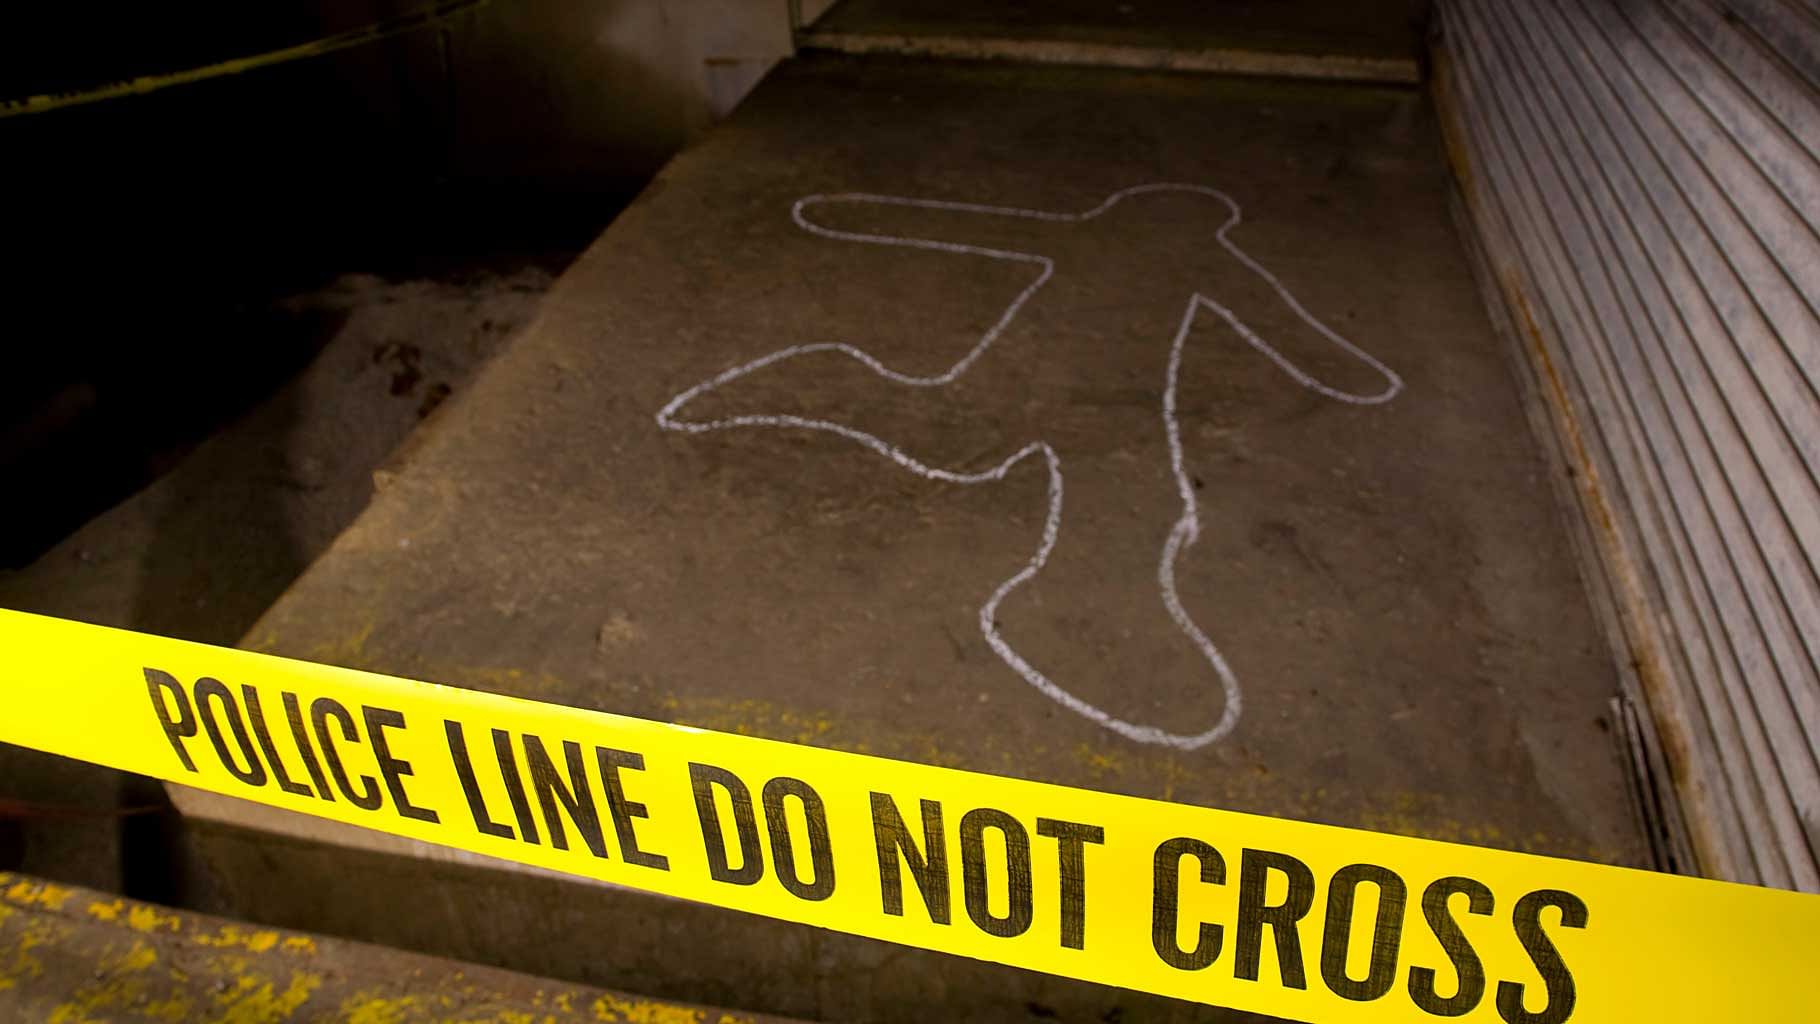 A 50-year-old man was arrested on Monday, 21 January in connection with the killing of a woman, whose burnt body was found near Thane last week, police said.